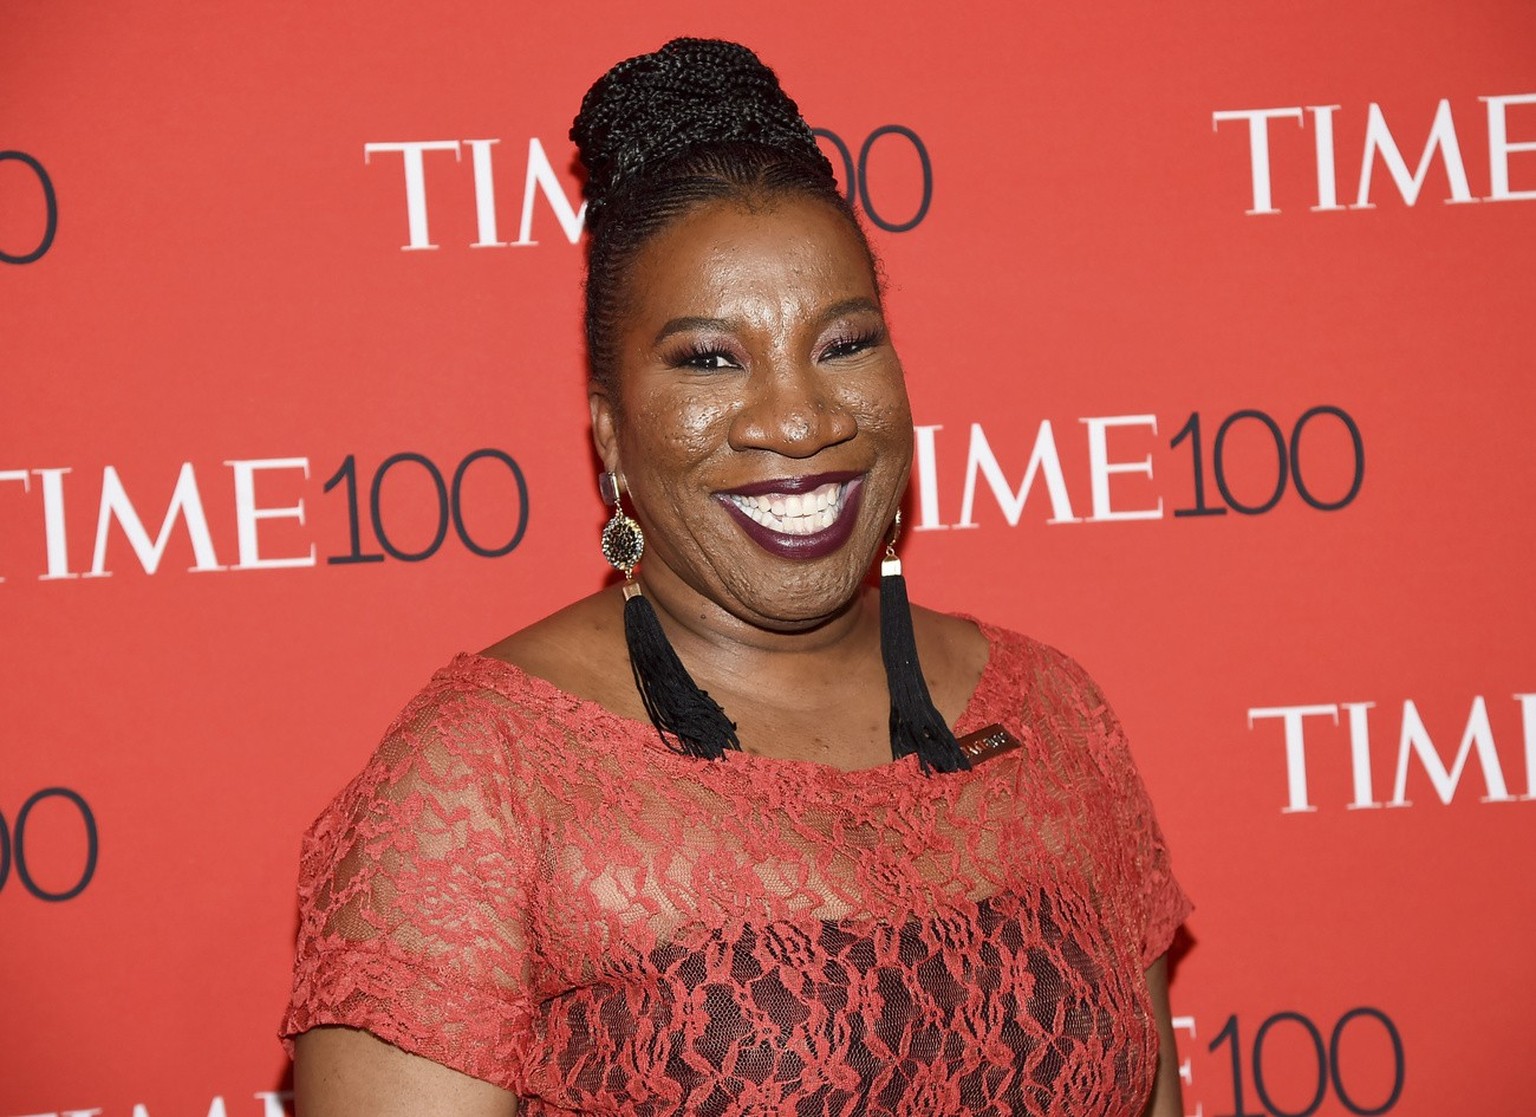 In this April 24, 2018 file photo, social activist Tarana Burke, founder of the #MeToo movement, attends the Time 100 Gala celebrating the 100 most influential people in the world in New York. Burke,  ...